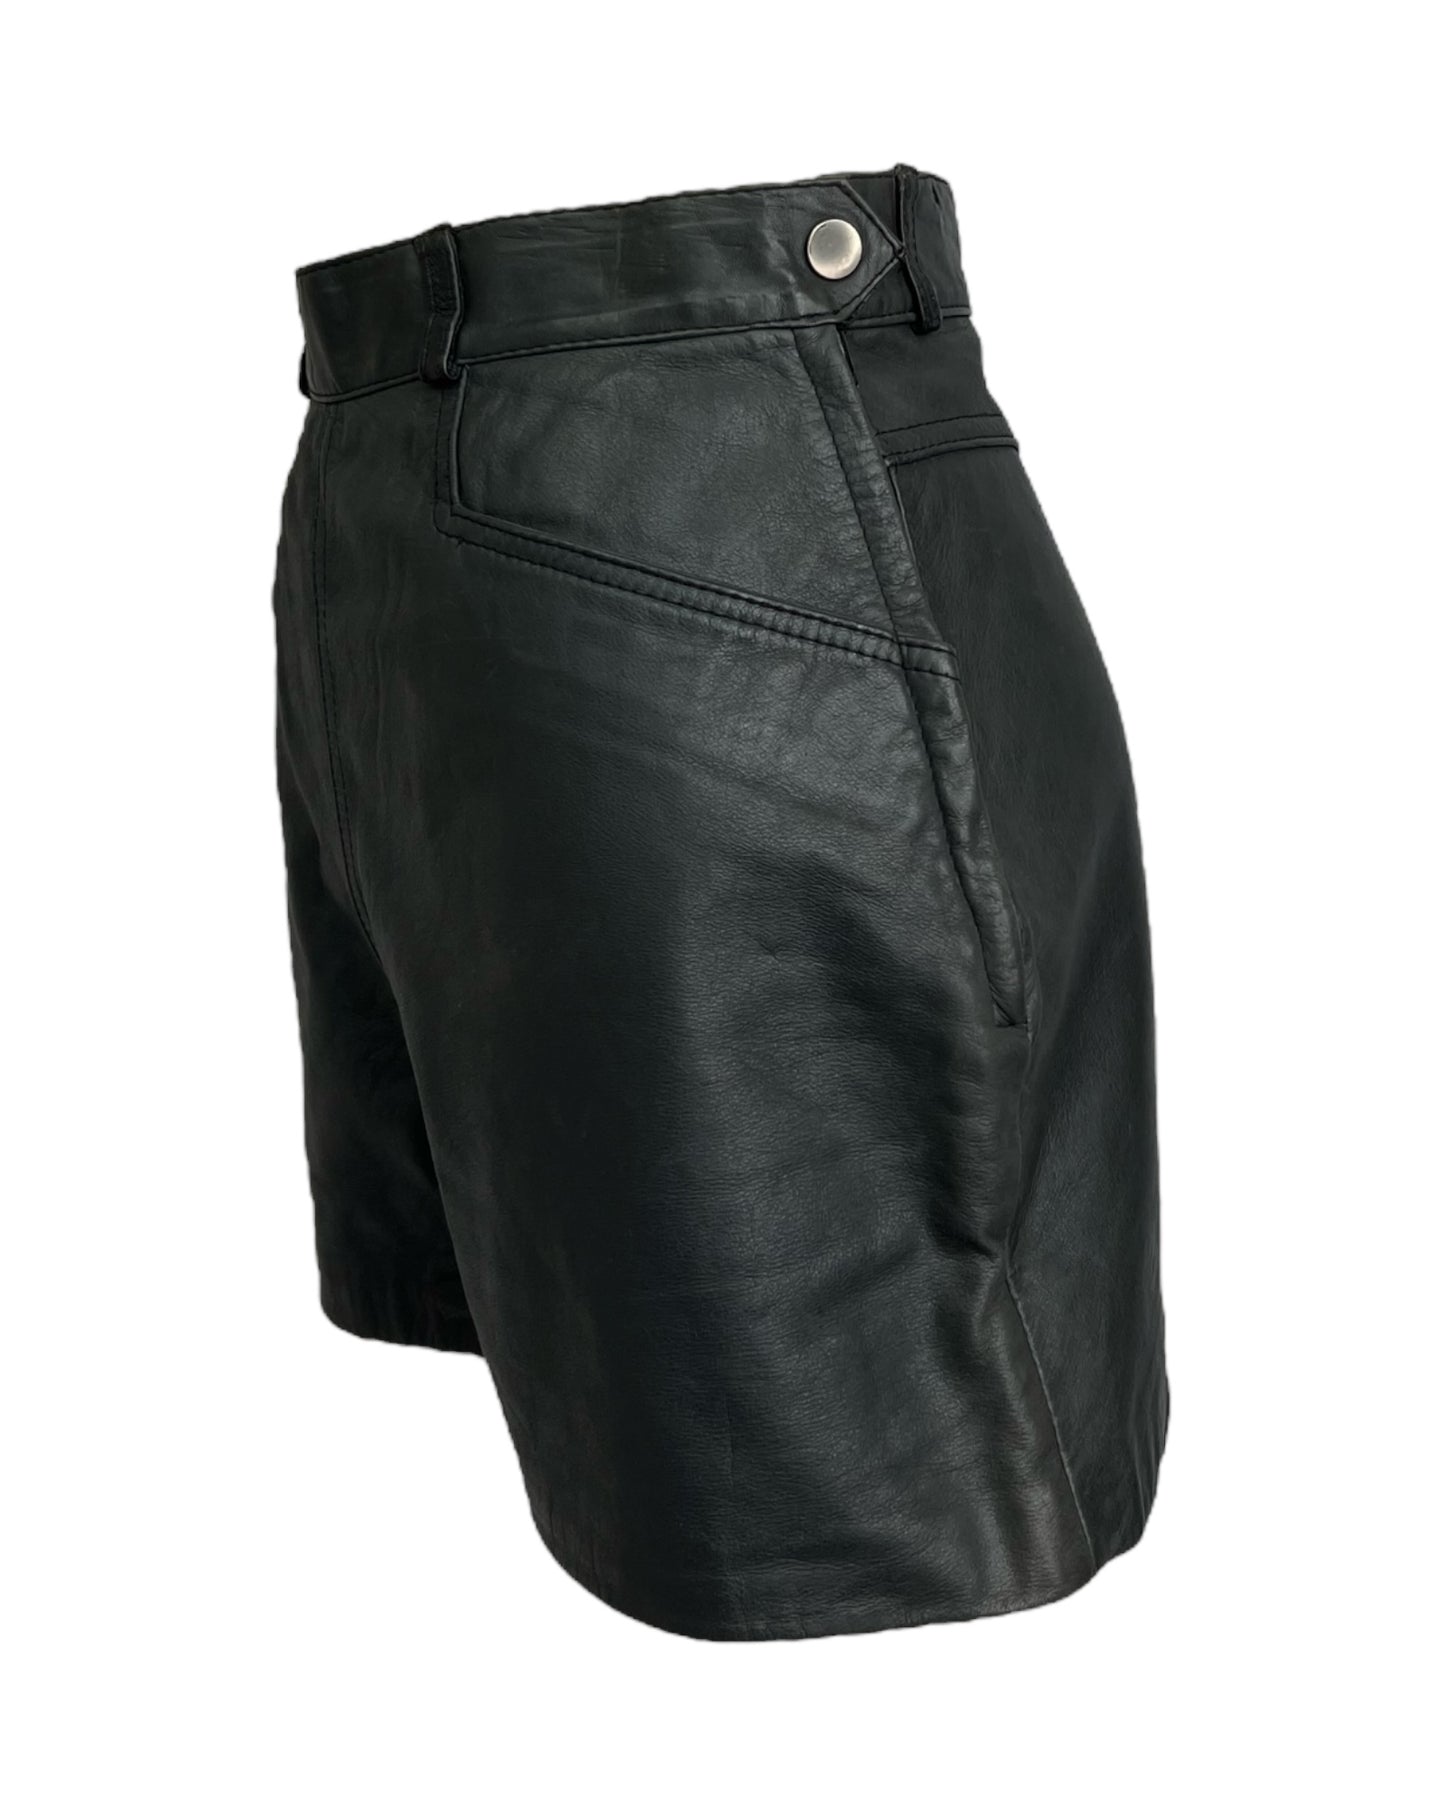 2000s Ride Me Like Your Motorcycle Shorts